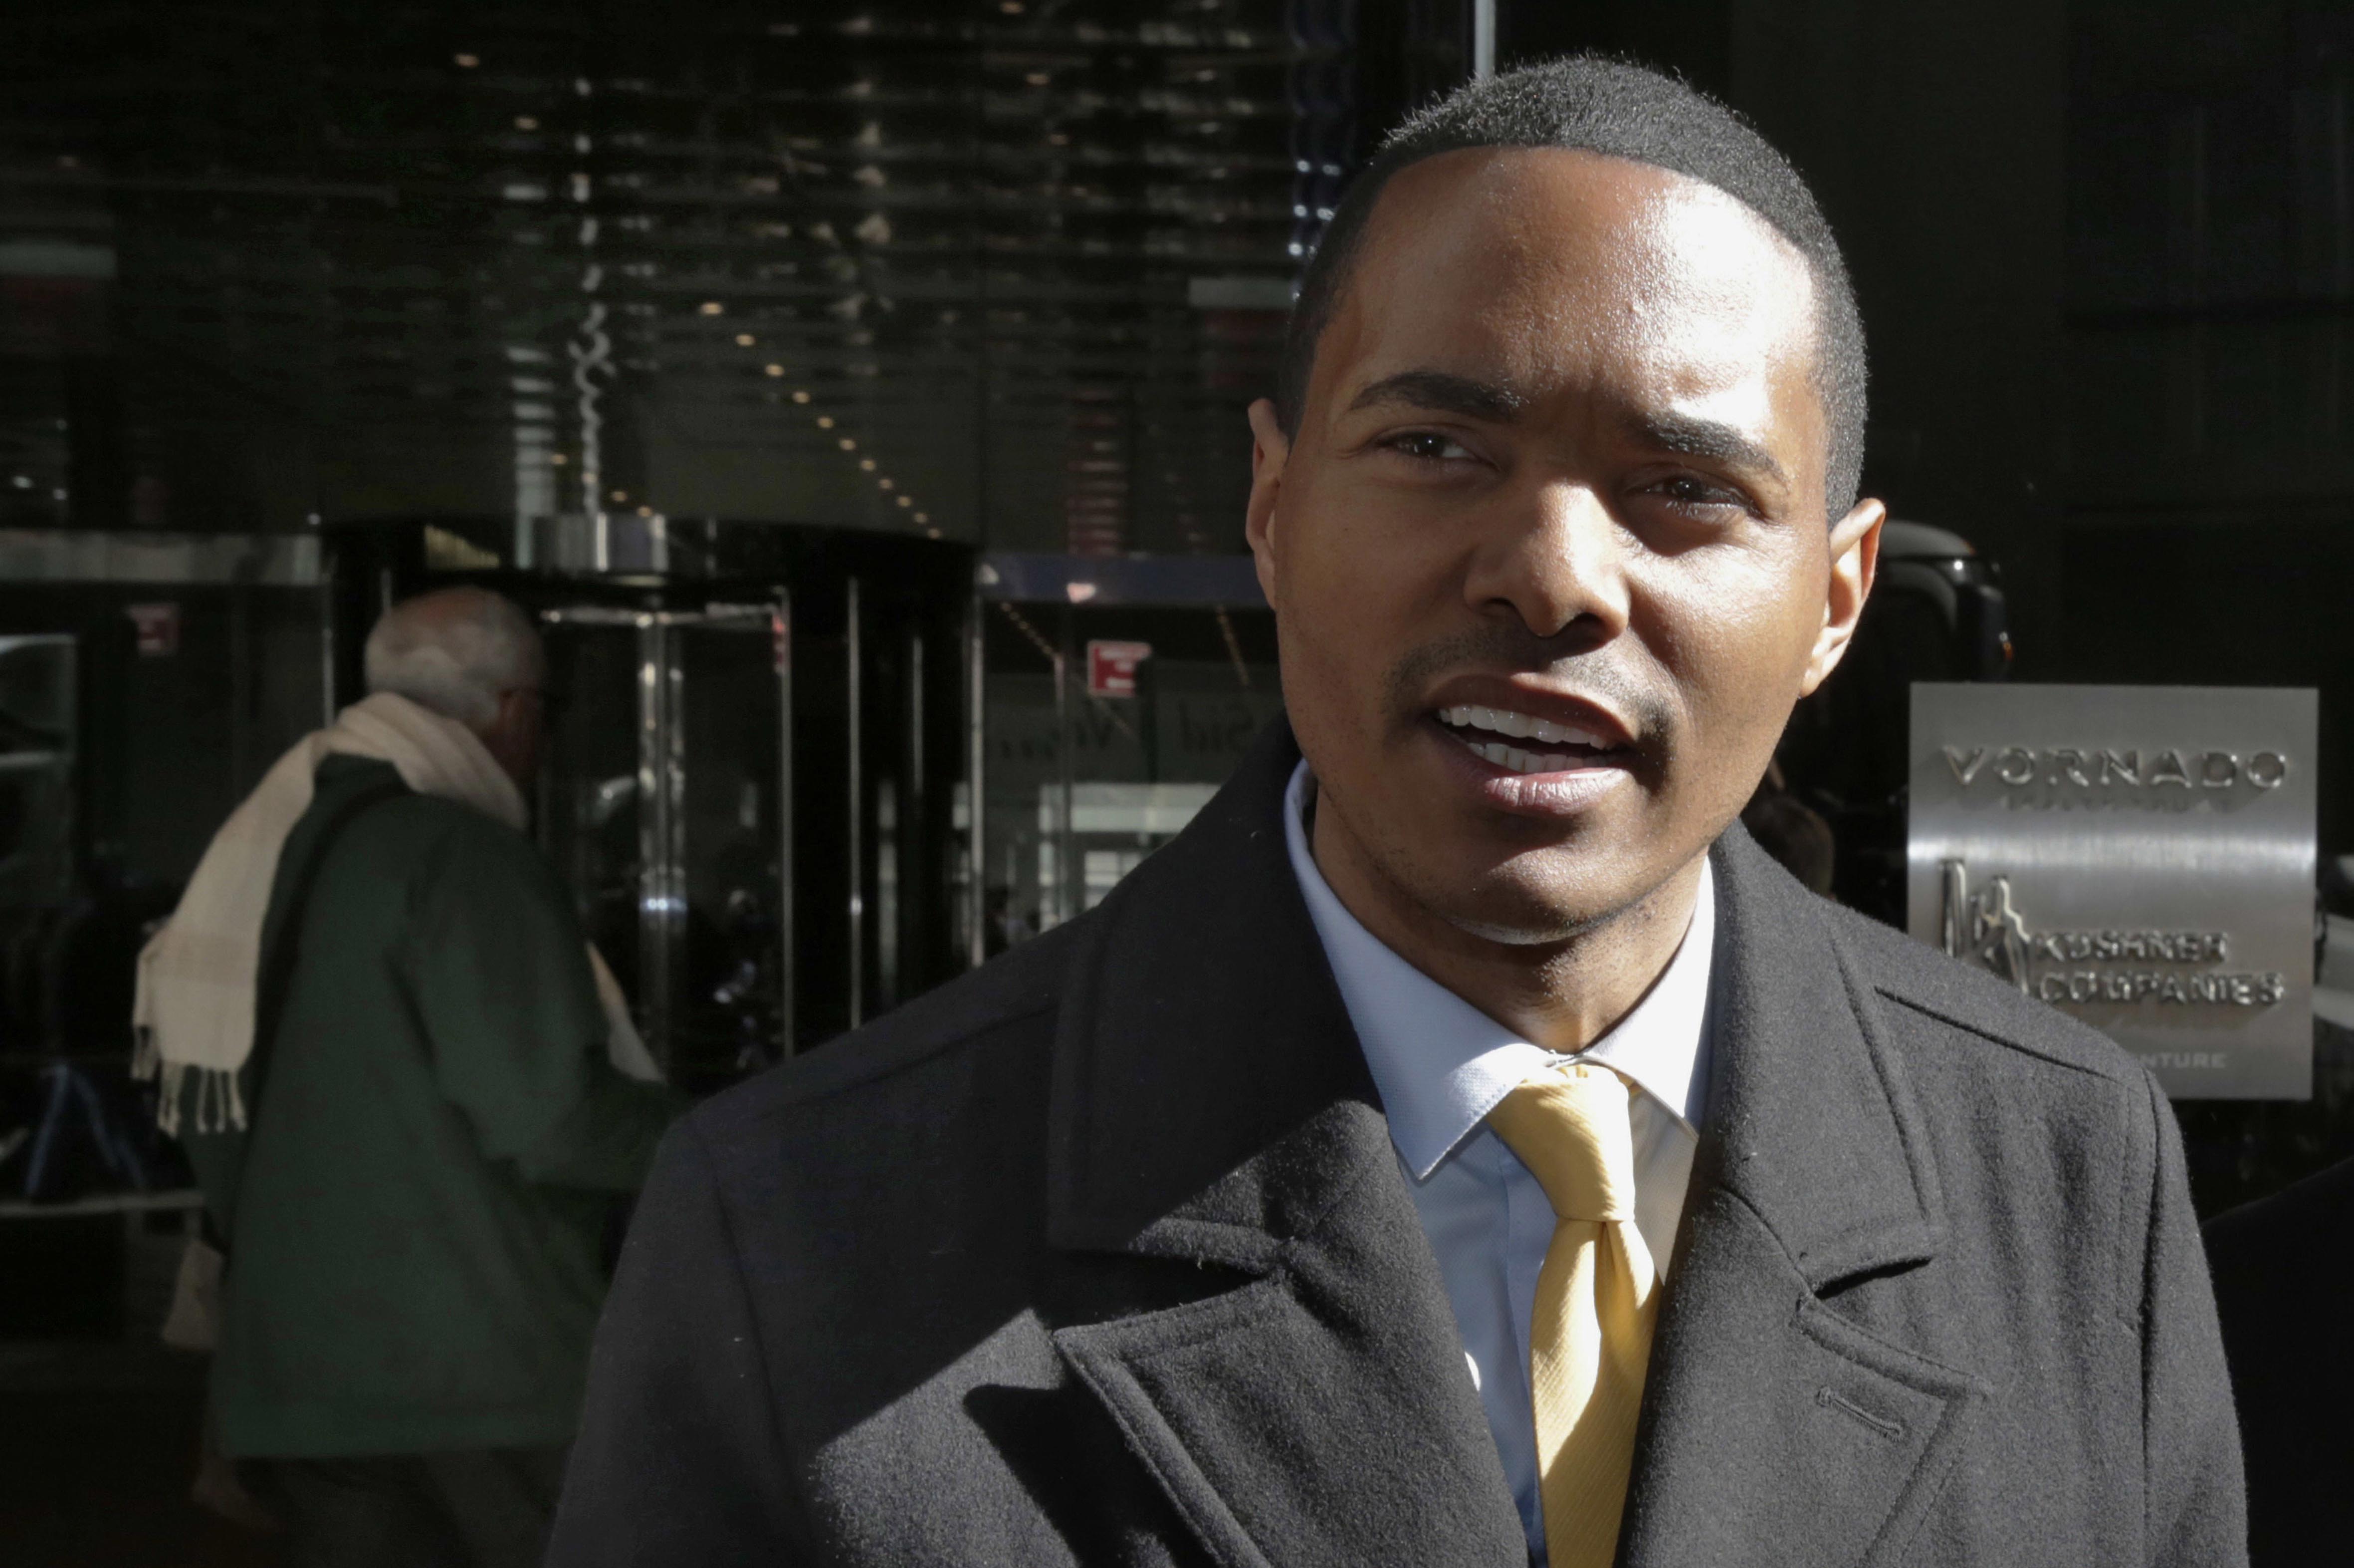 New York City Council Member Ritchie Torres addresses a news conference | AP Photo